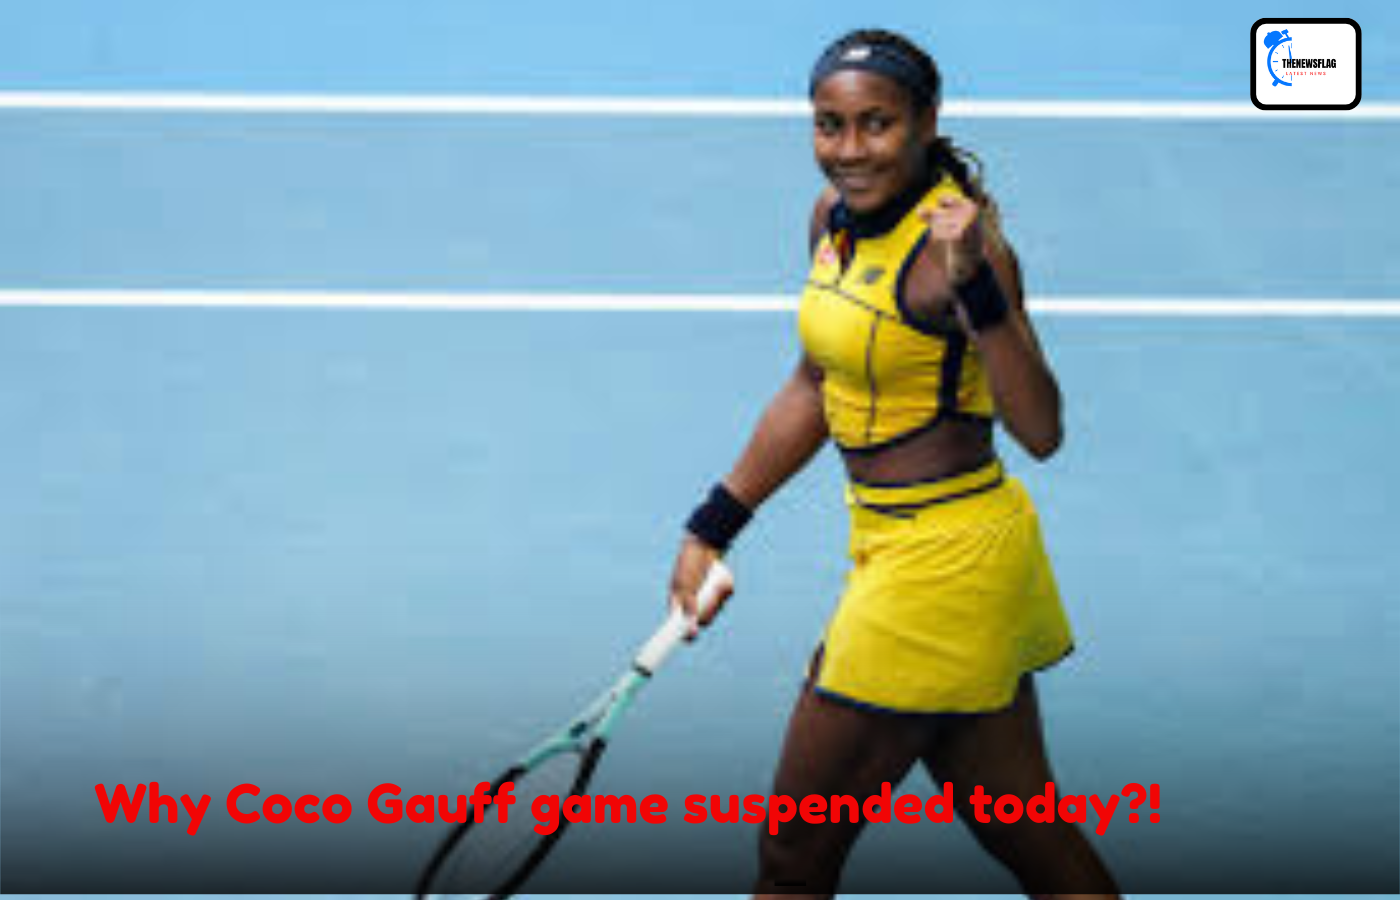 Why Coco Gauff game suspended today?!